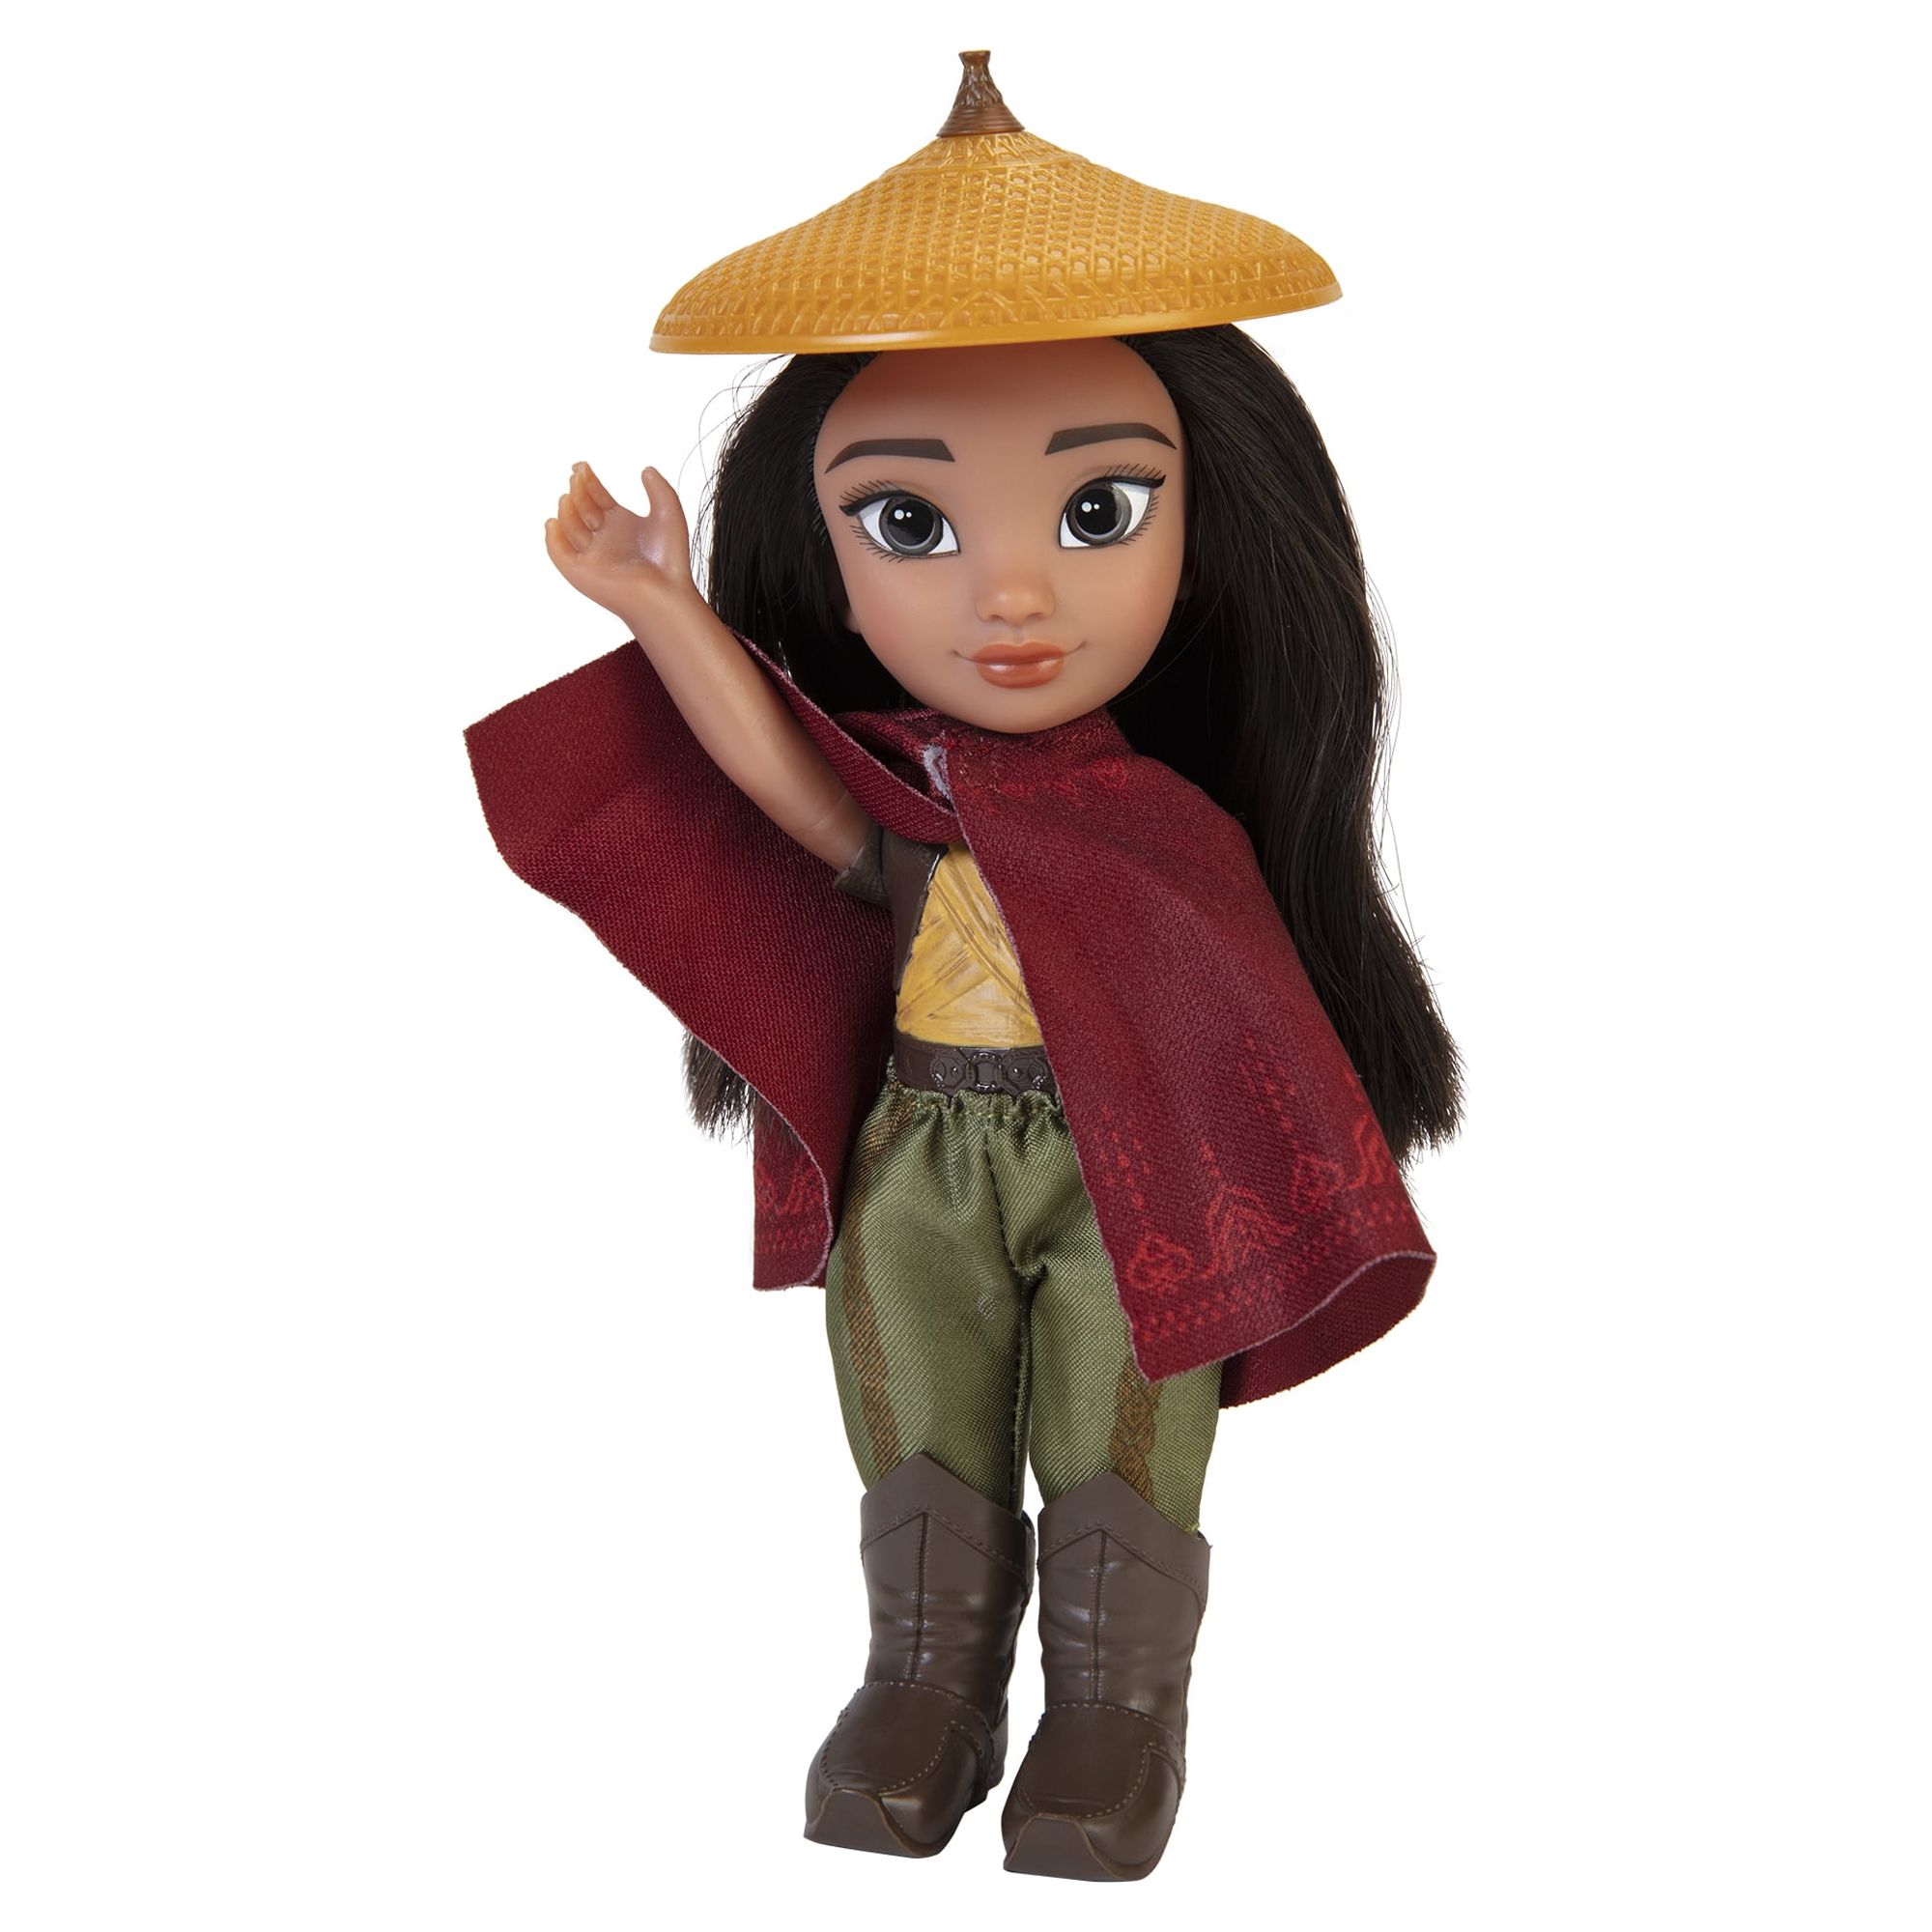 Raya and the Last Dragon 6" Petite Raya Doll Playset, 5 Pieces Included - image 2 of 11